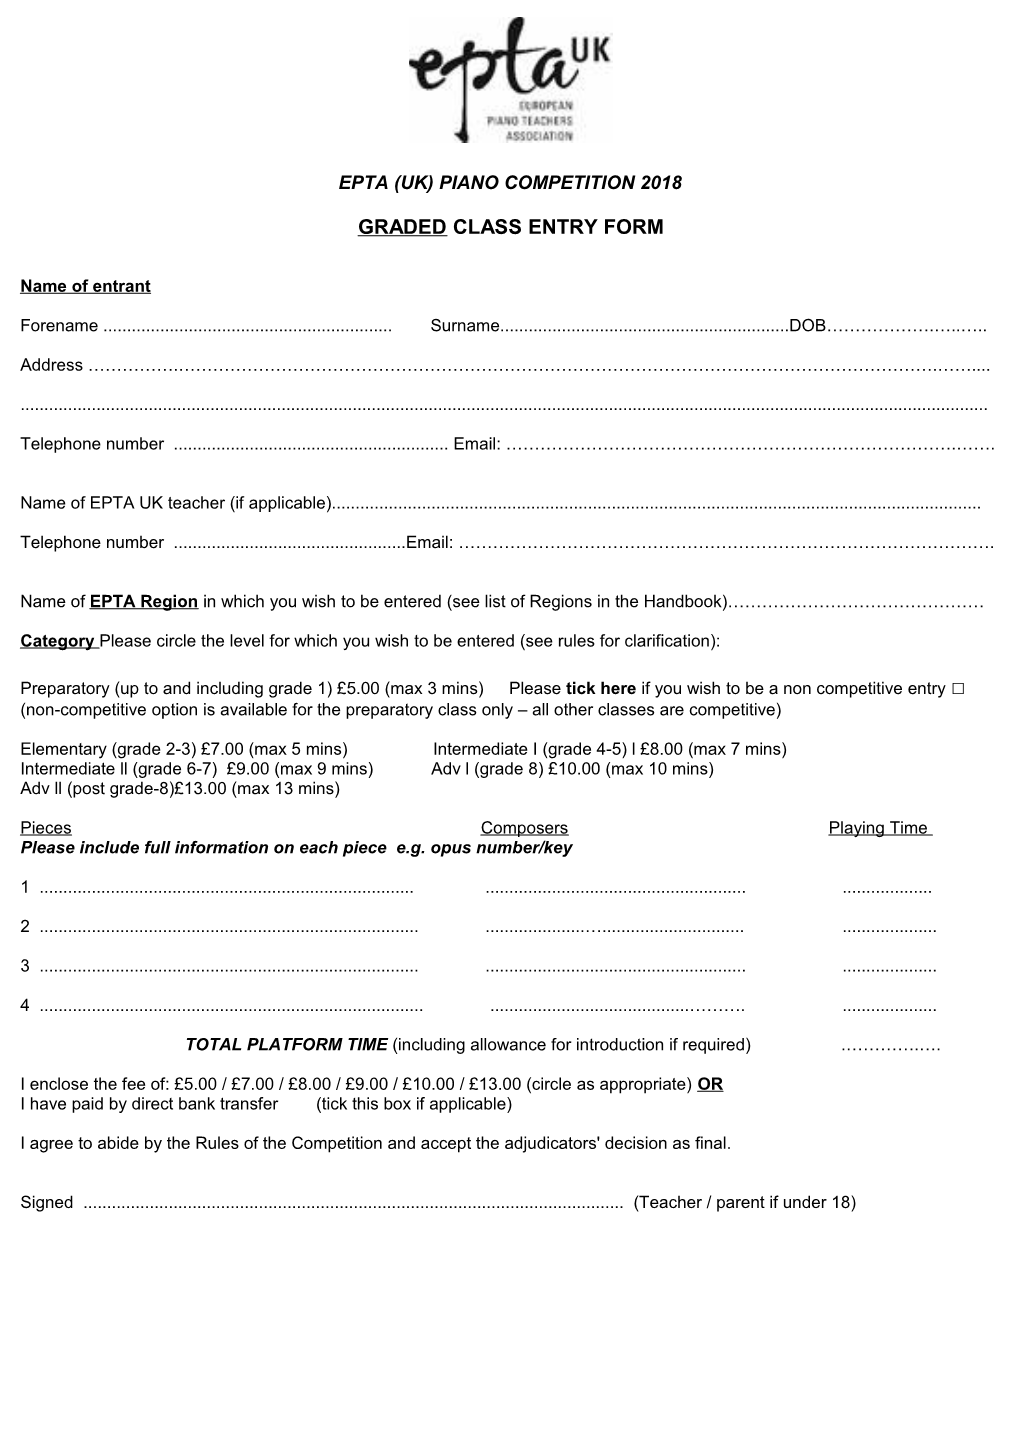 Graded Class Entry Form